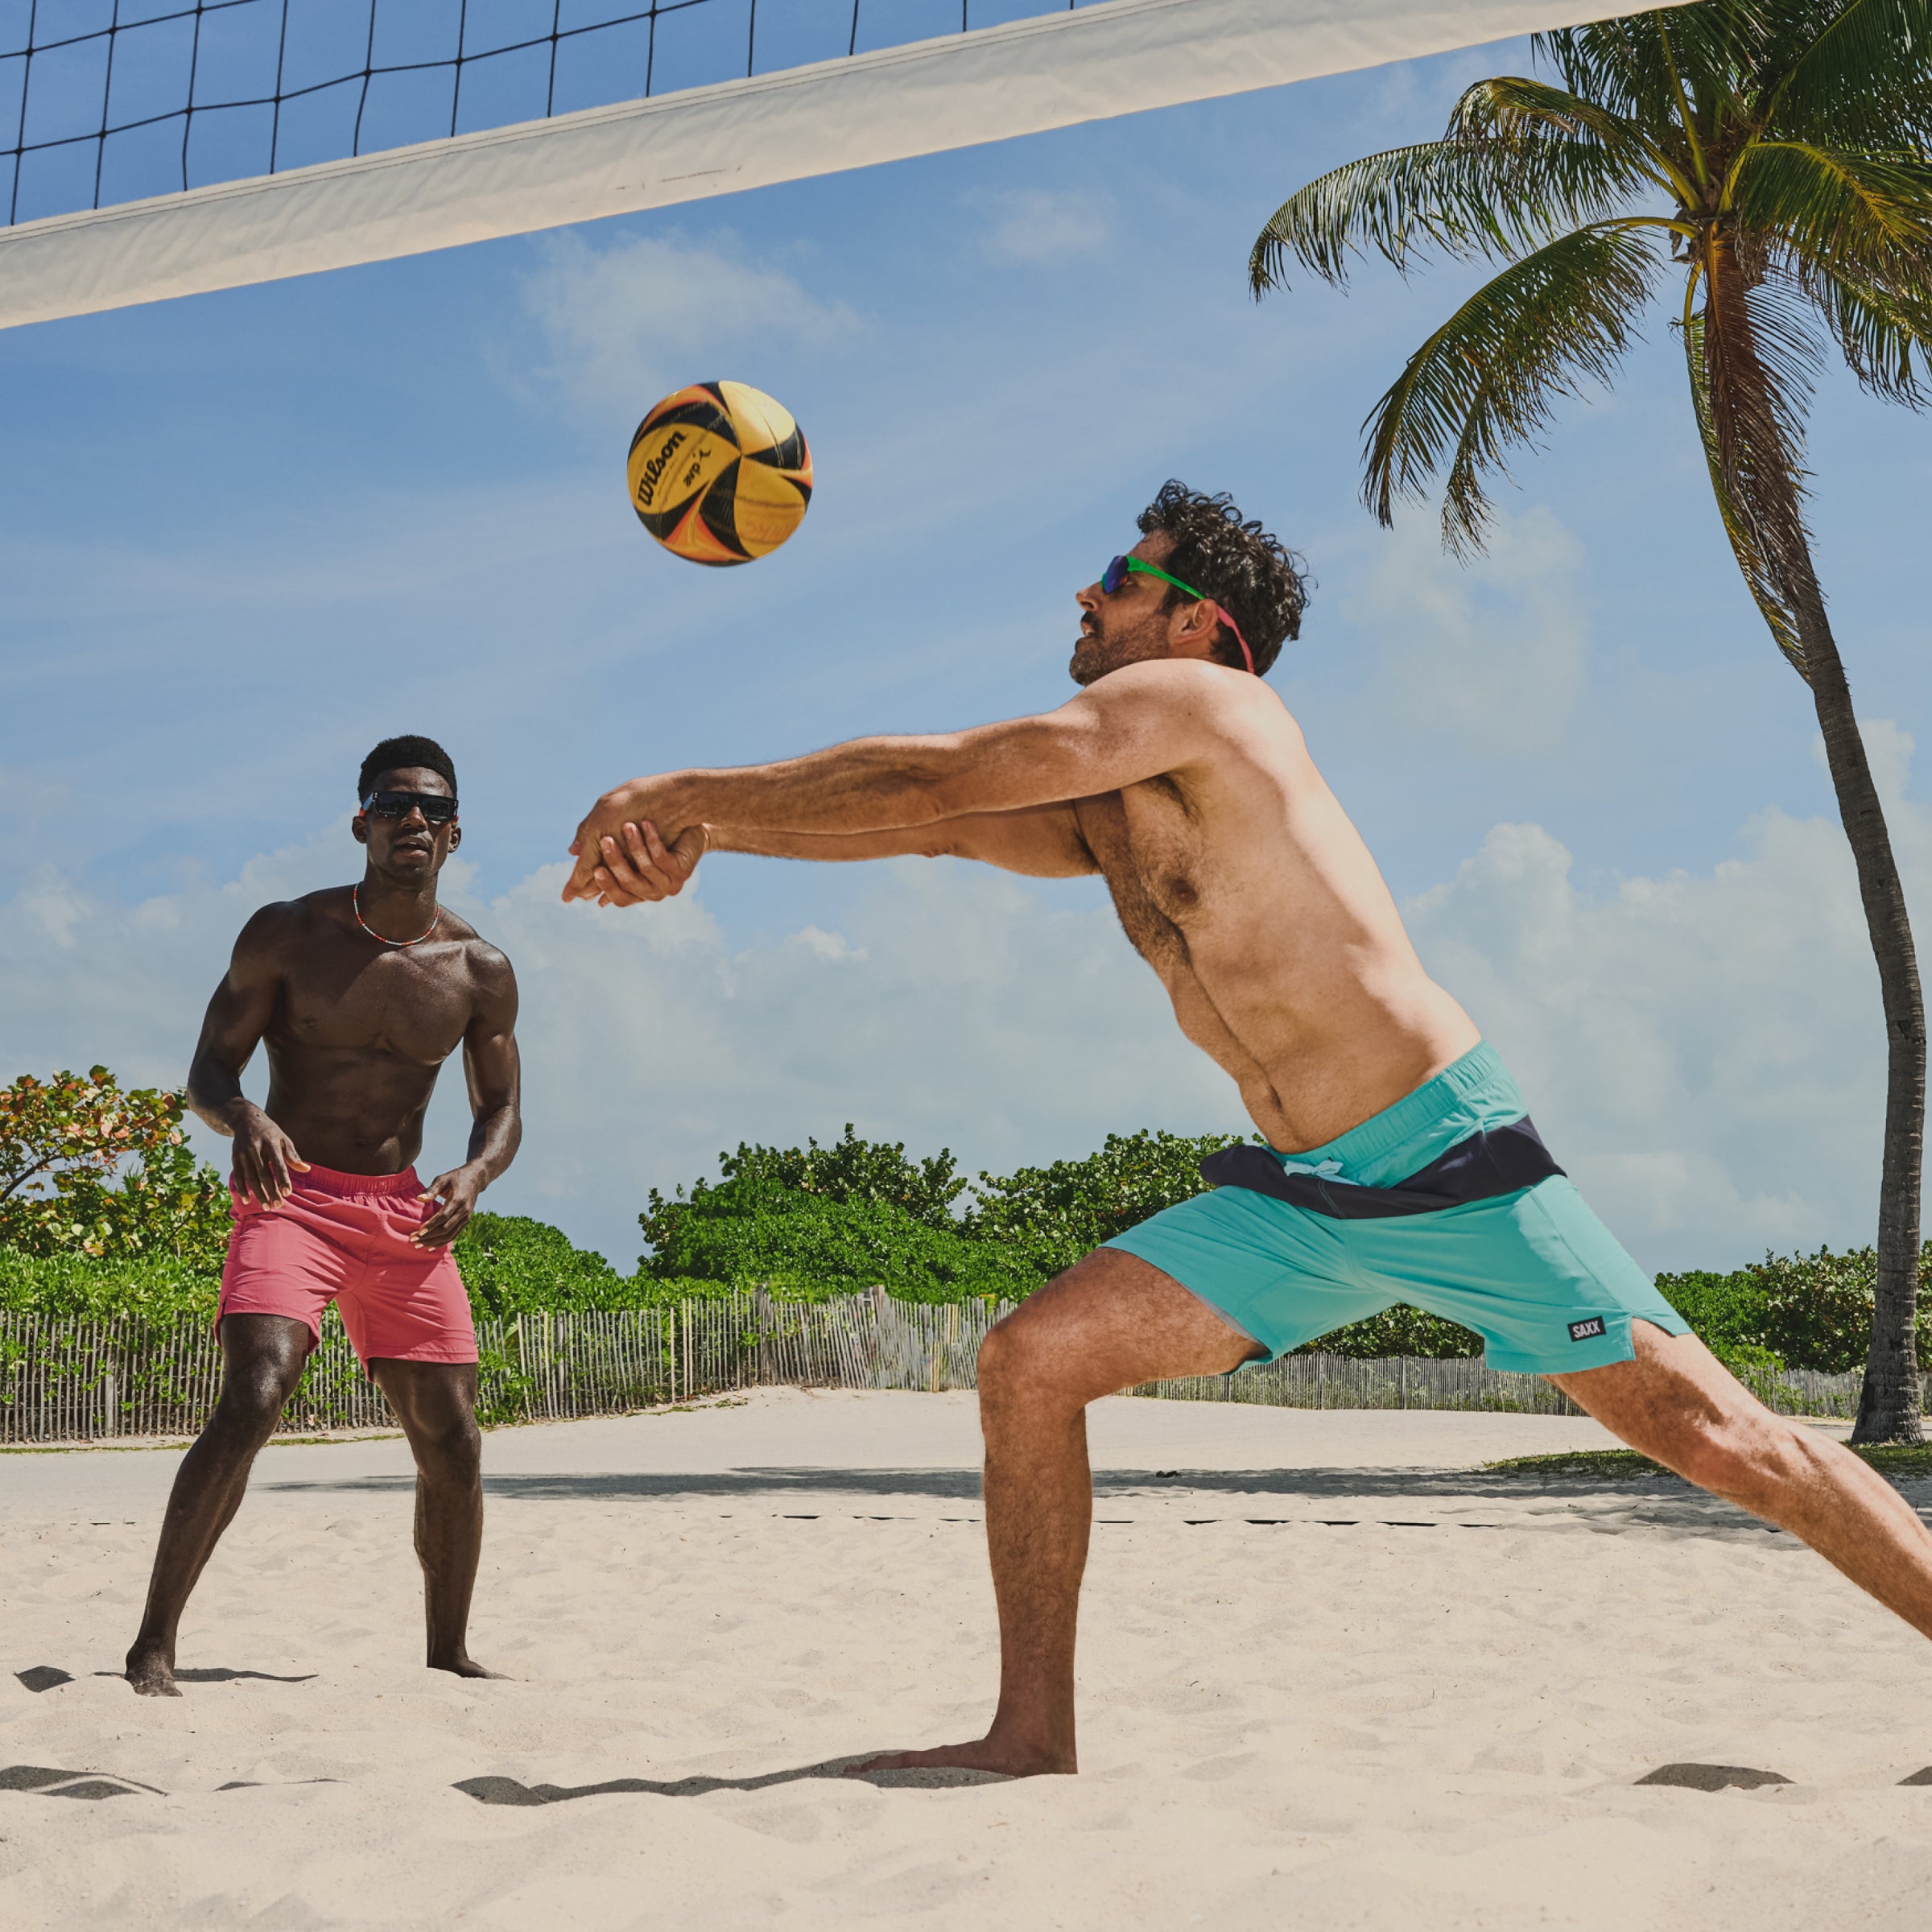 Two men play volley ball on the same side of the court. Both wear bright color swim shorts. The man in the foreground bounces the ball into the air.